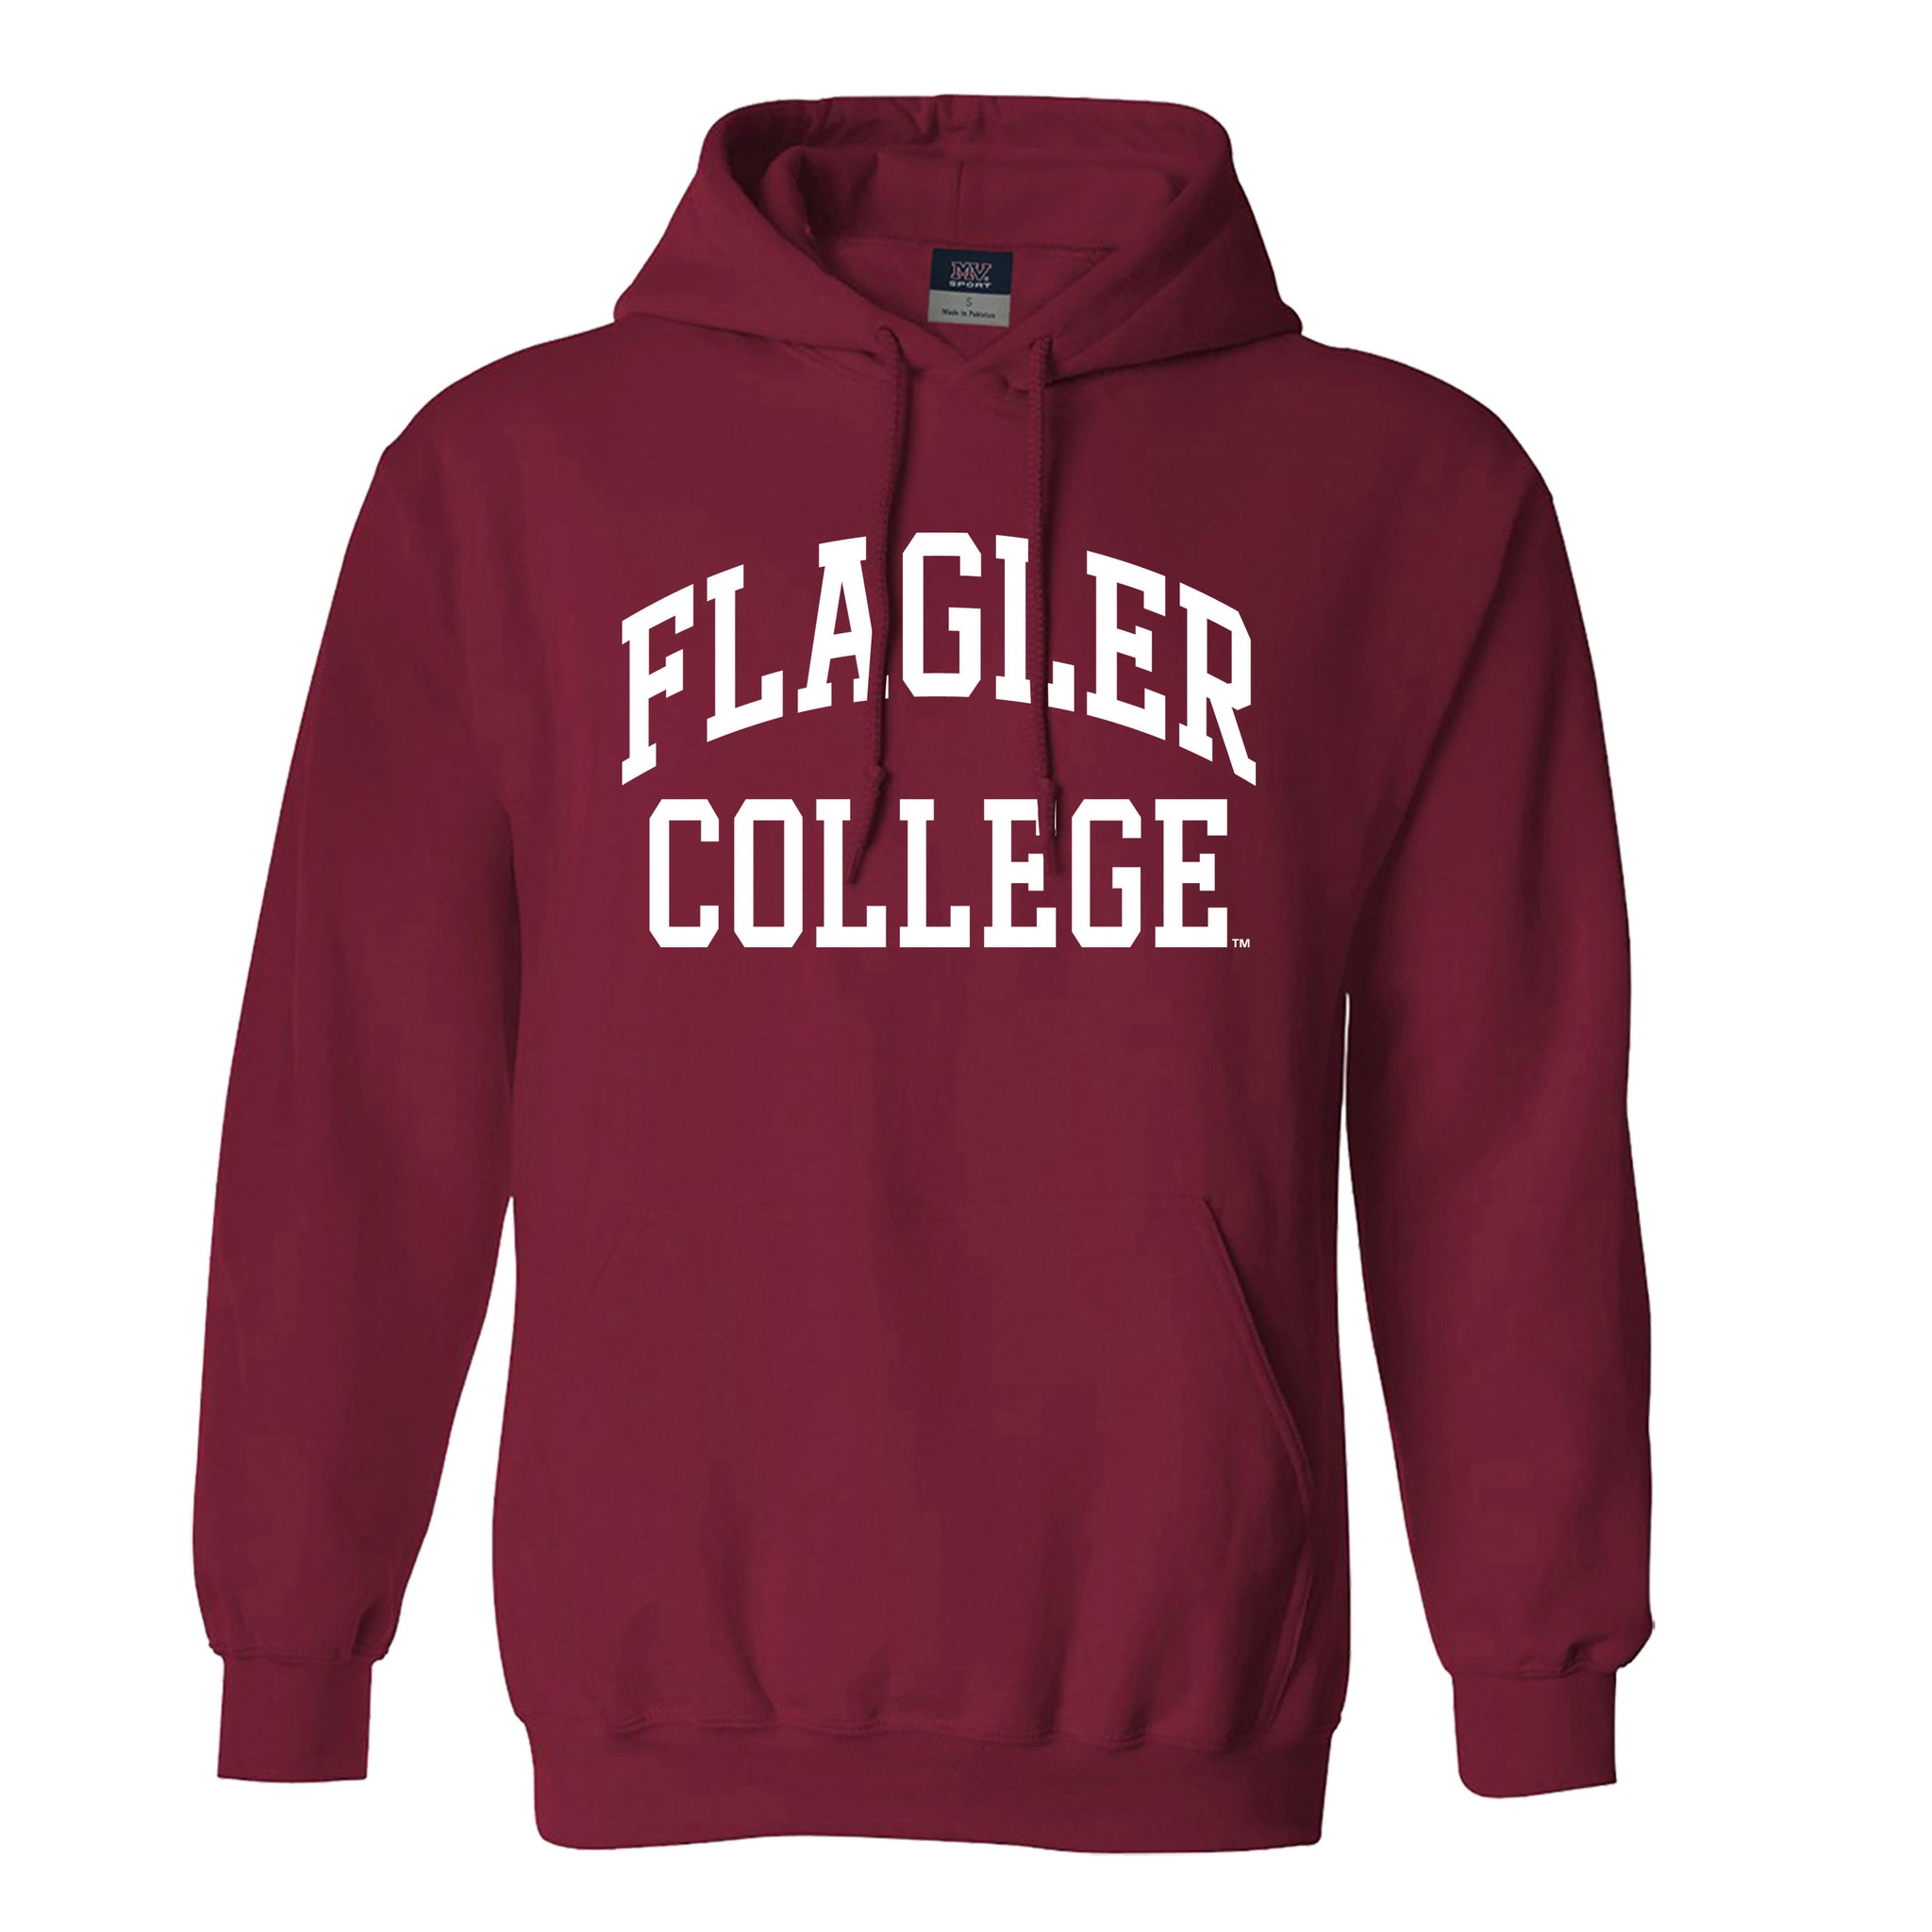 Crimson solid hooded sweatshirt with white imprint saying Flagler over College